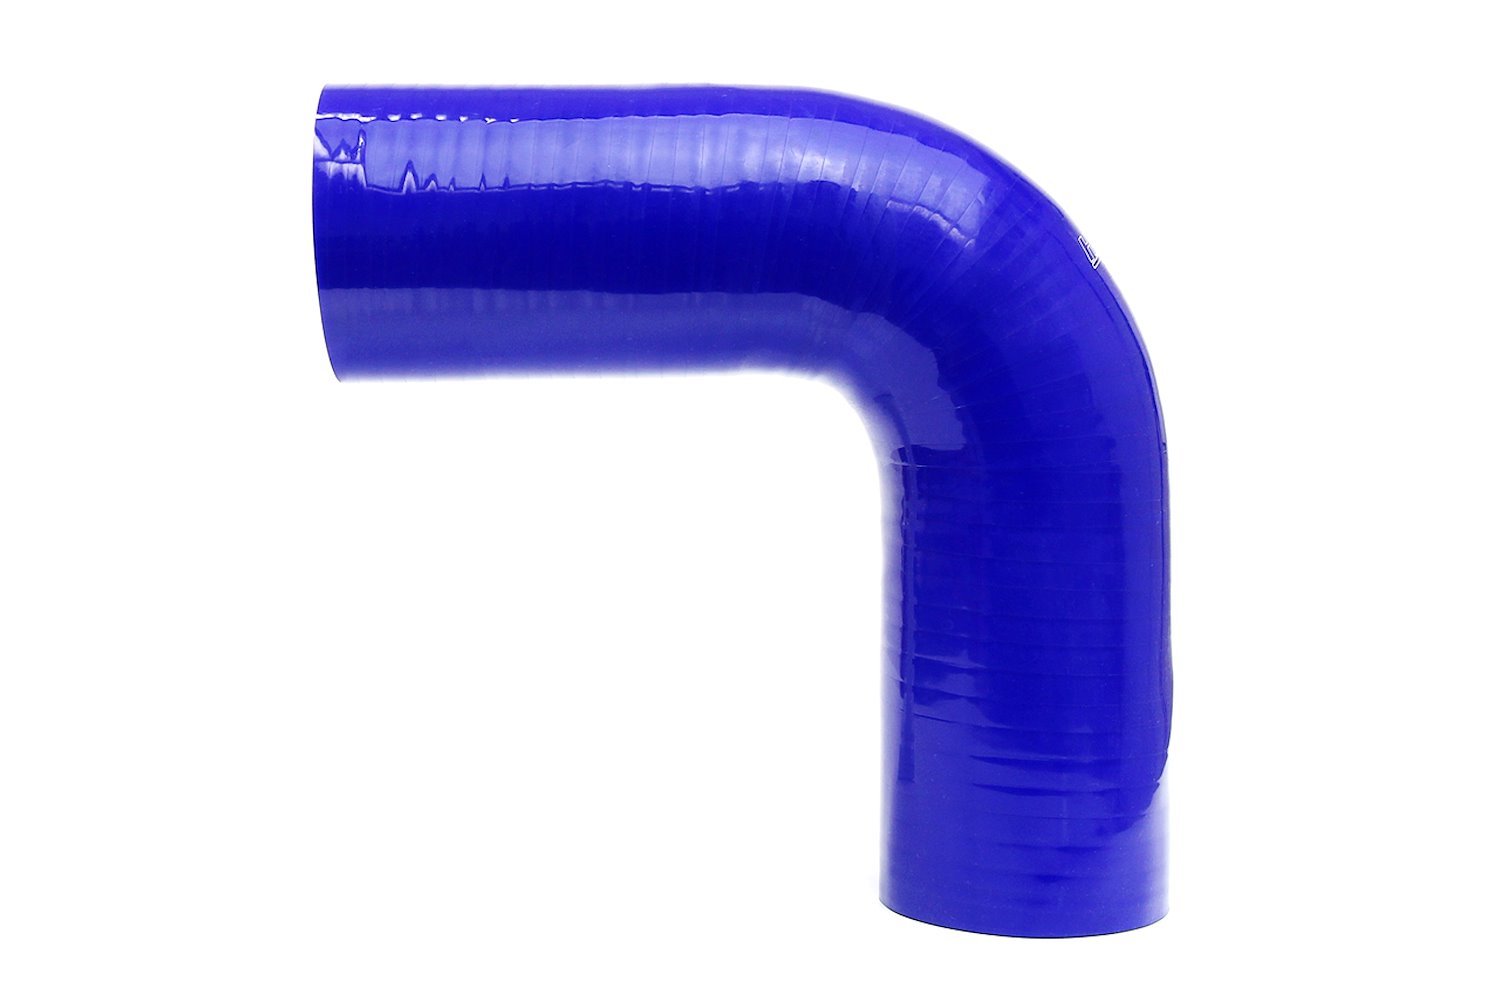 HTSEC90-225-BLUE Silicone 90-Degree Elbow Coupler Hose, High-Temp 4-Ply Reinforced, 2-1/4 in. ID, Blue